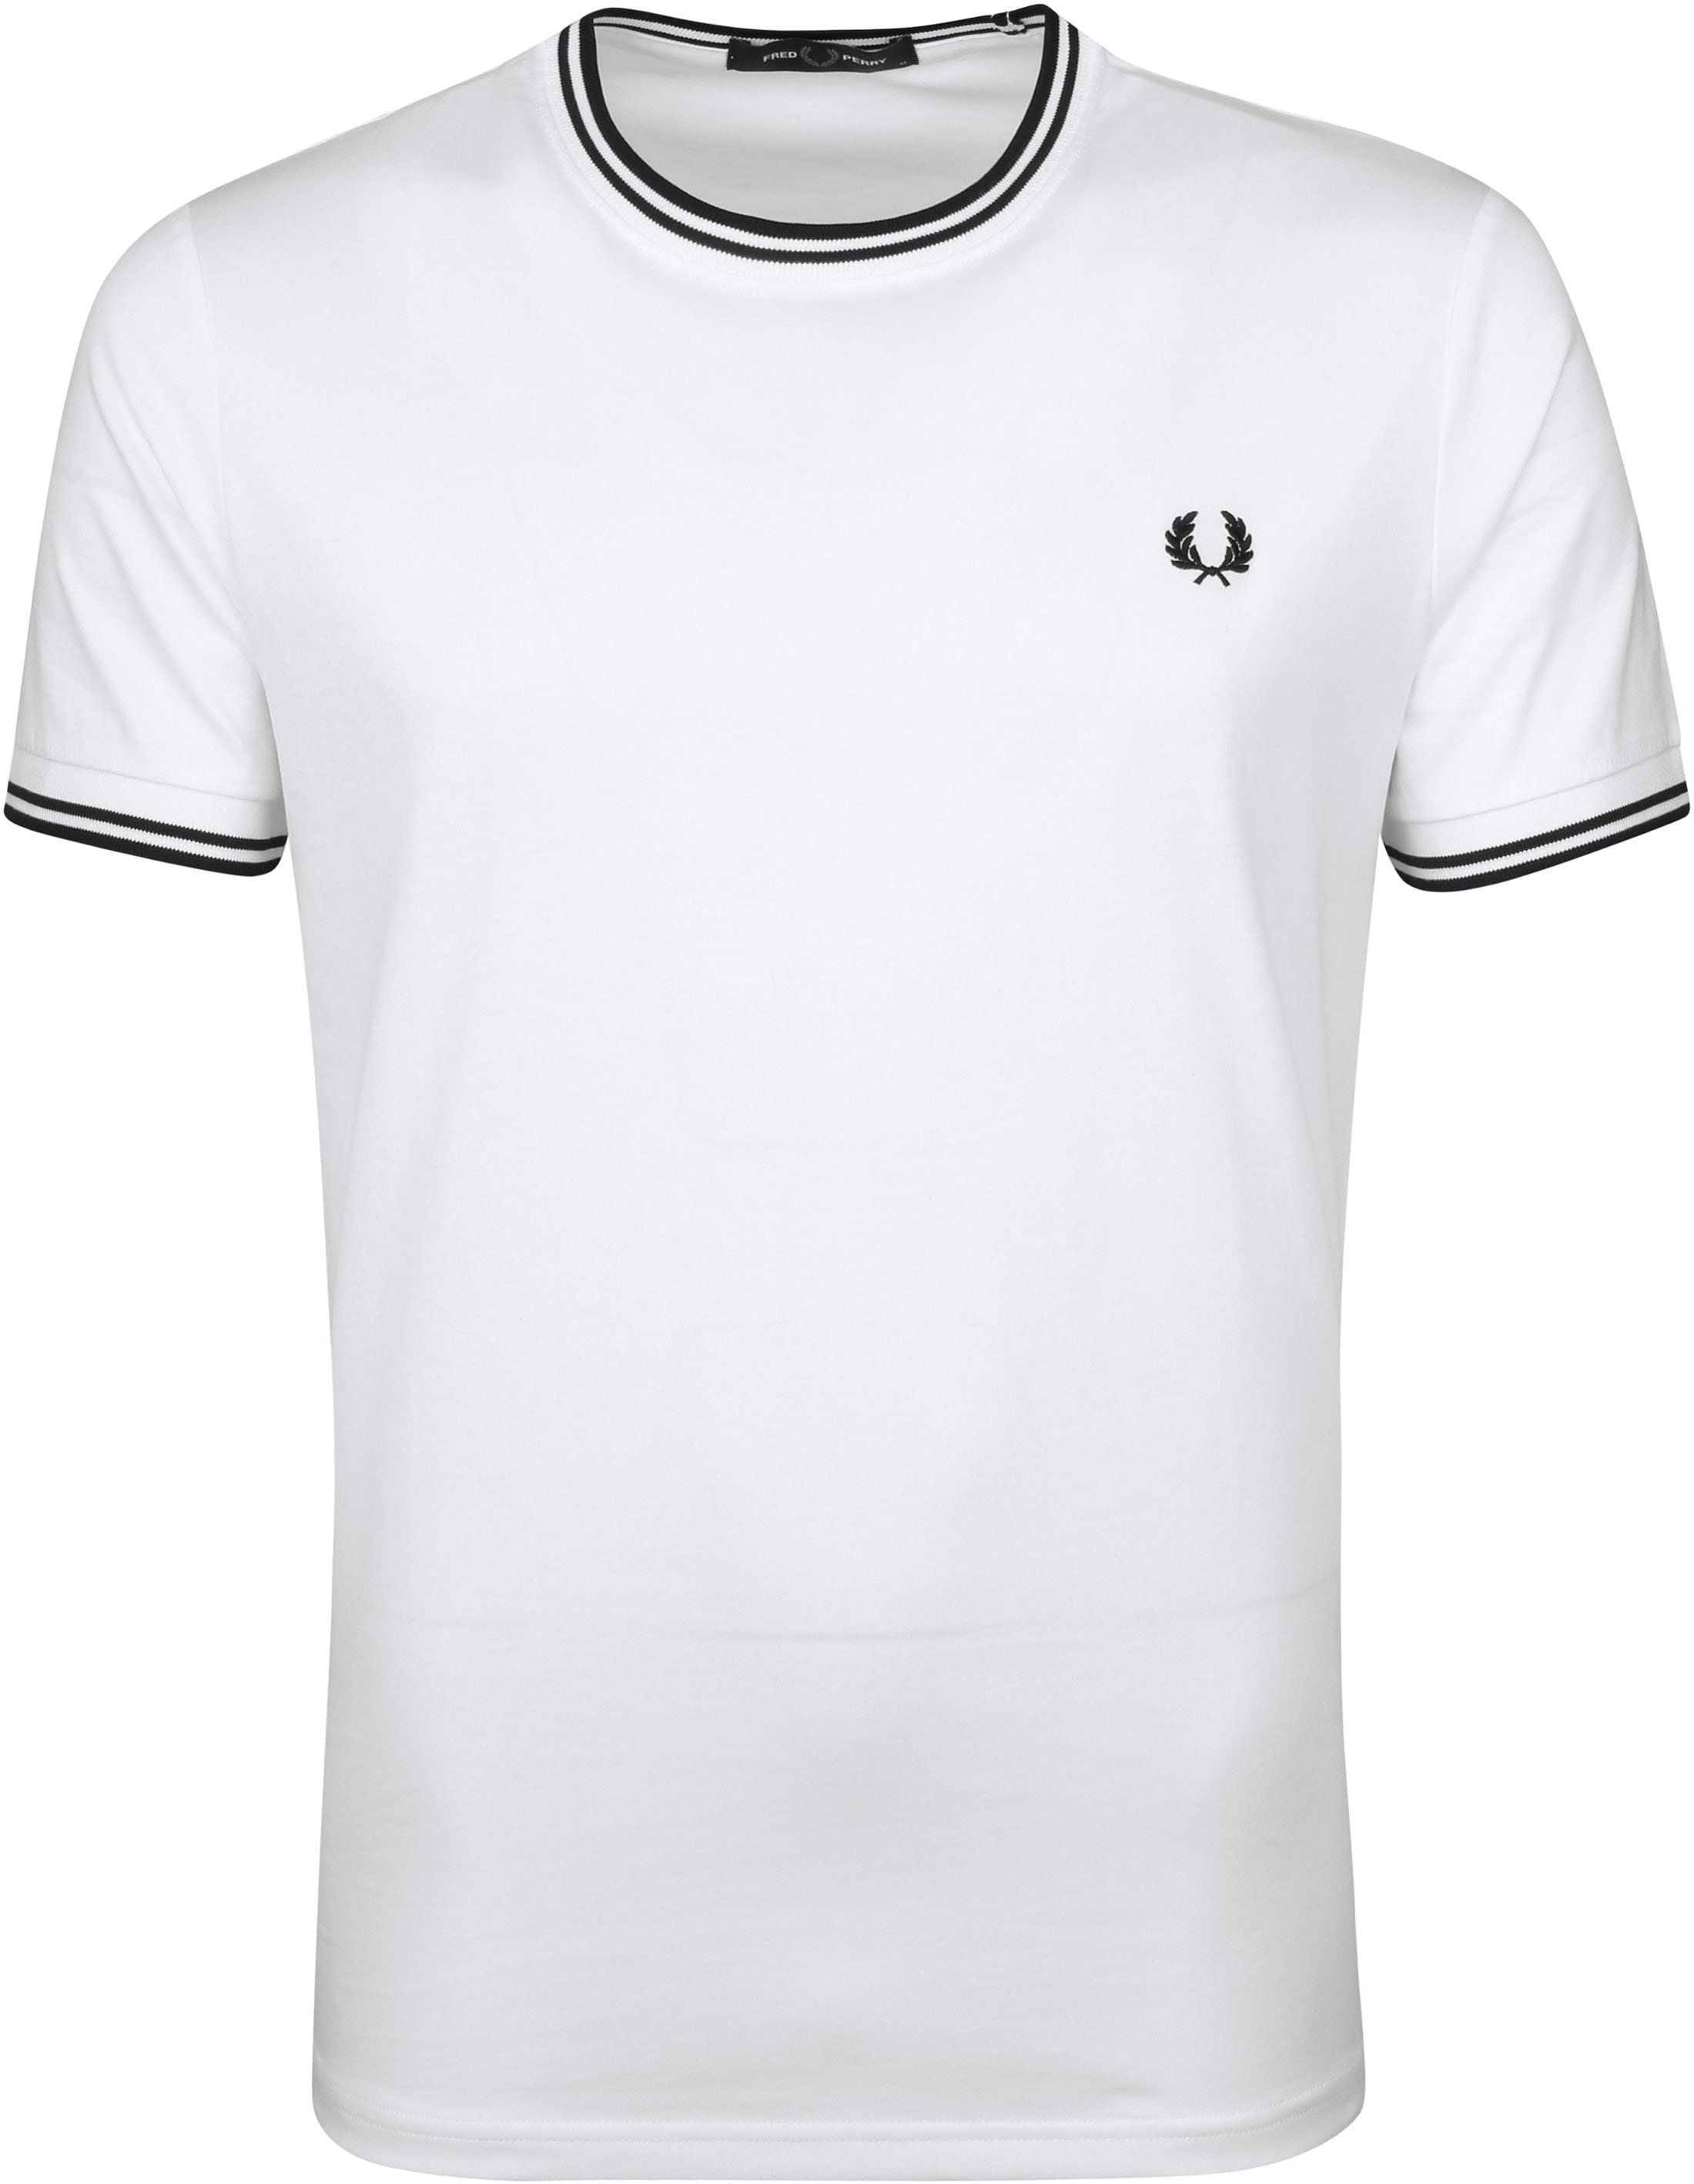 Fred Perry T-shirt White size XL